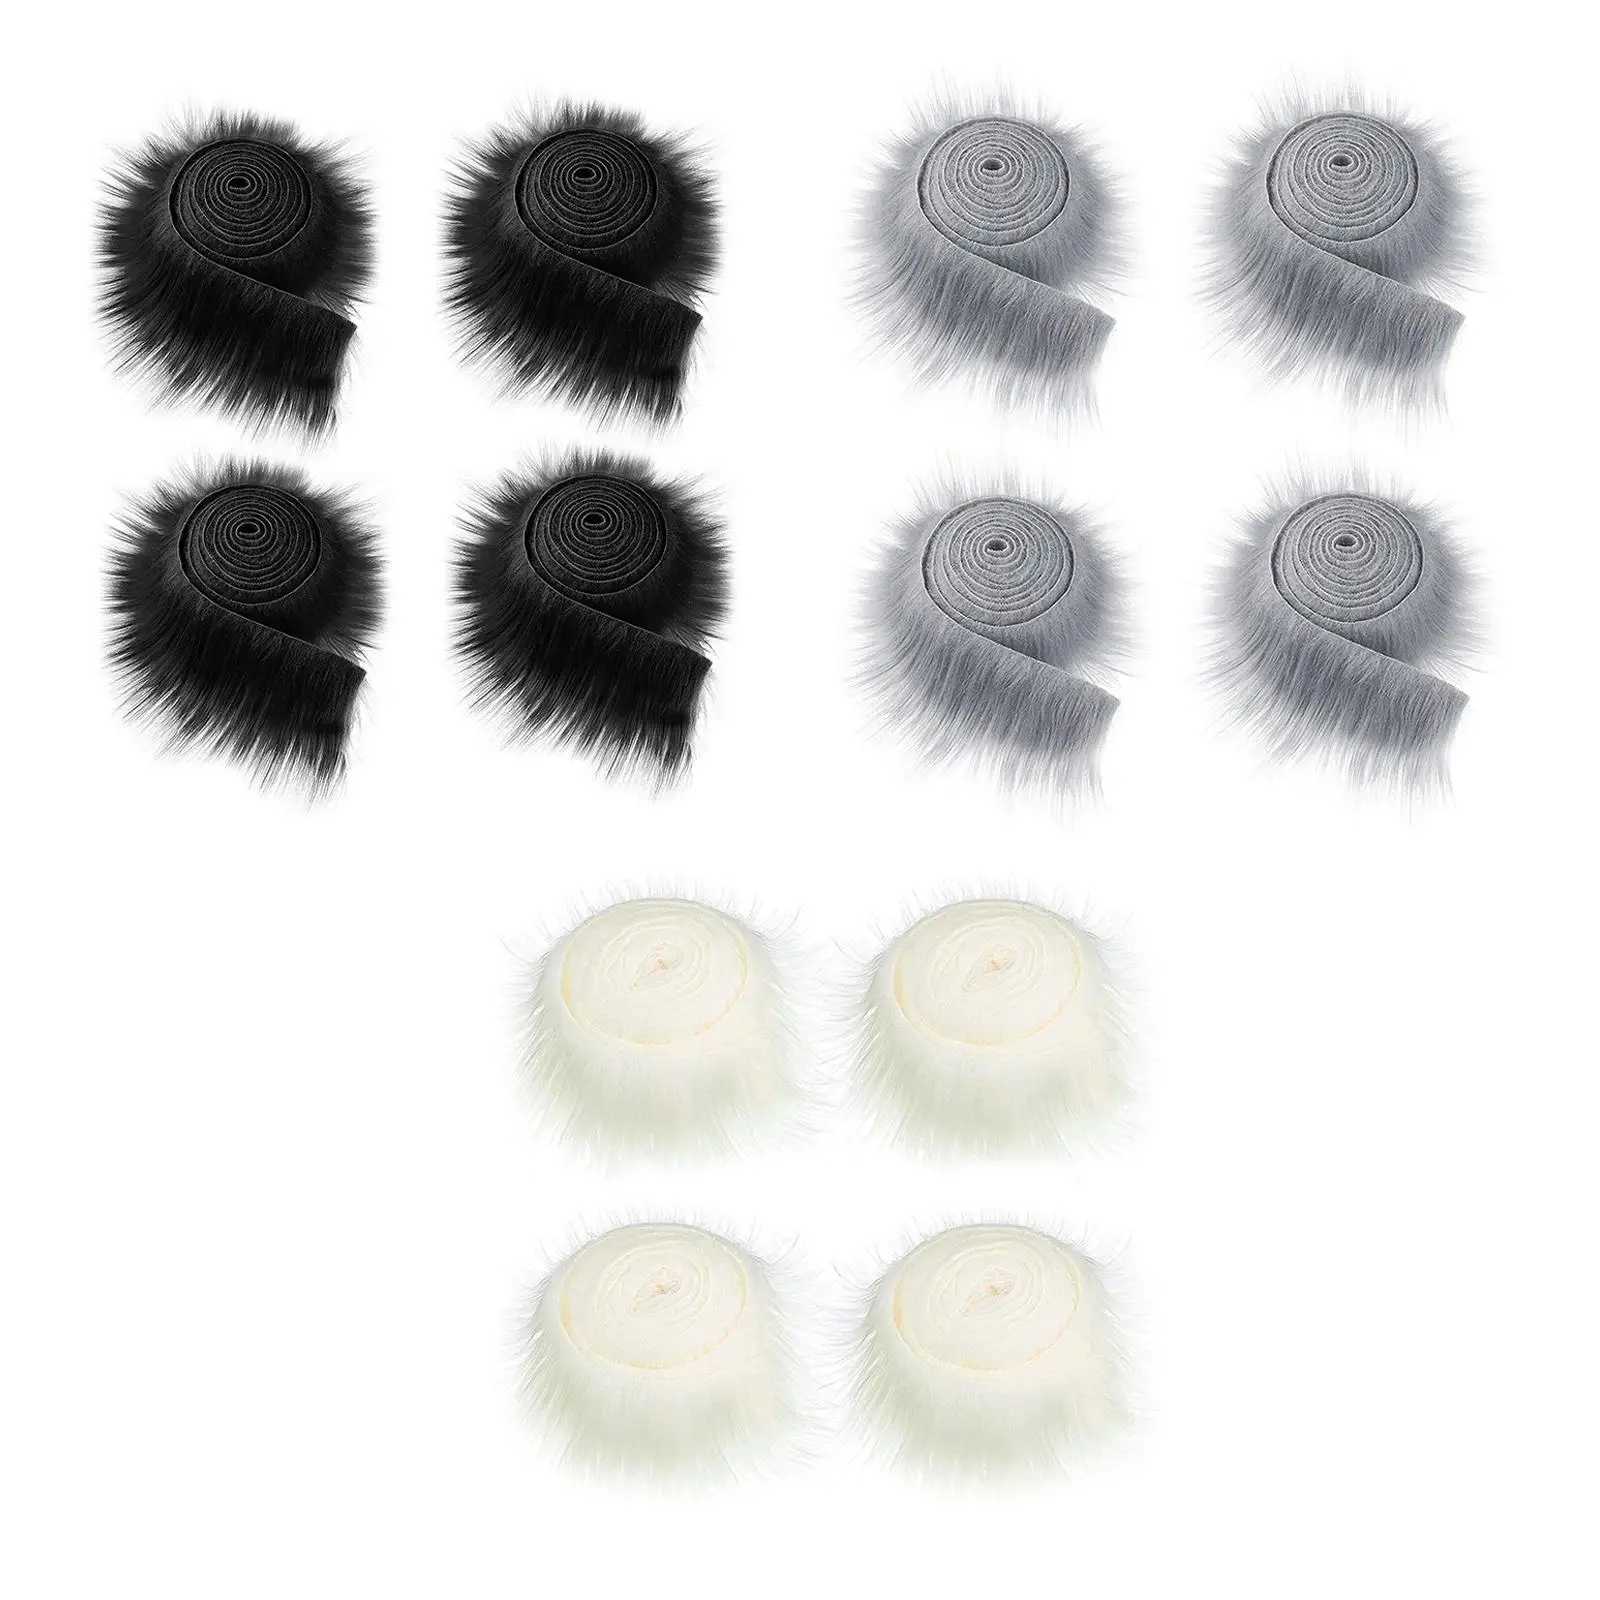 4Pcs Soft Faux Fur Fabric Costume Fuzzy Faux Fur Fabric Craft DIY Clothing Toy for Christmas Party Decoration